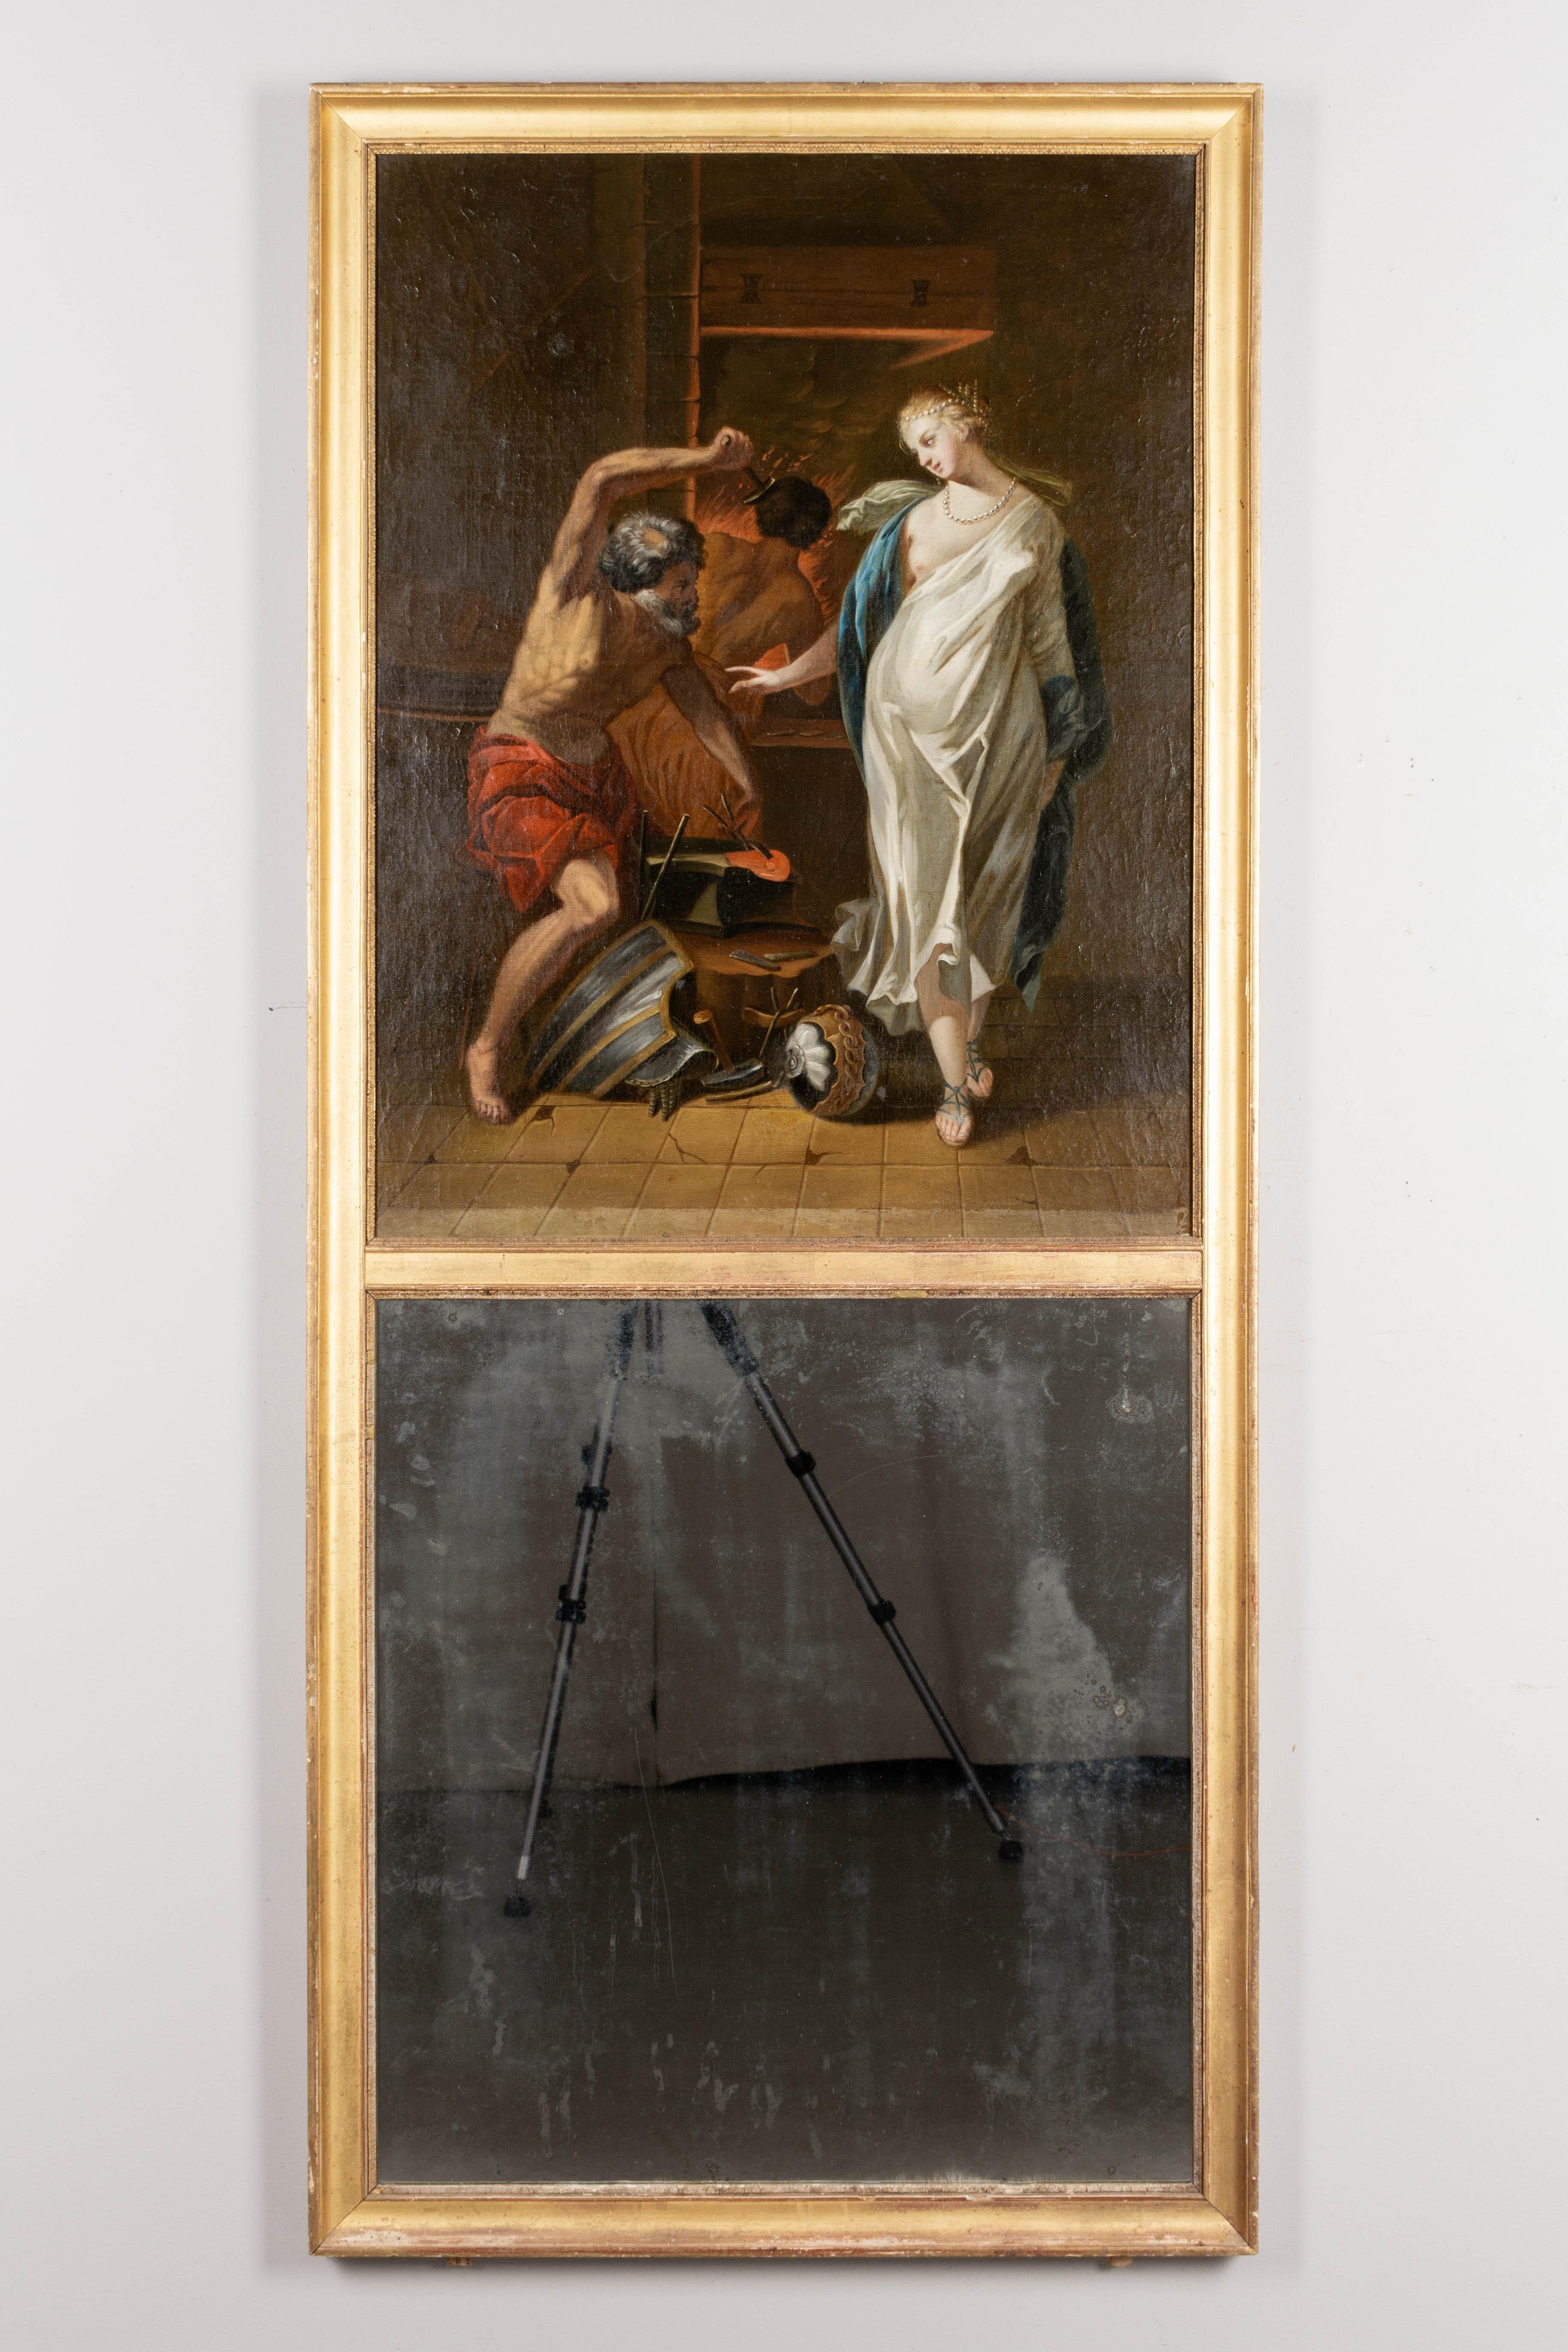 An 18th century French Louis XVI style trumeau mirror with a large painting depicting Venus at the Forge of Vulcan. Fine quality oil on canvas with vivid color. Gilded wood frame is in good condition with minor losses and touch-ups. Original mirror